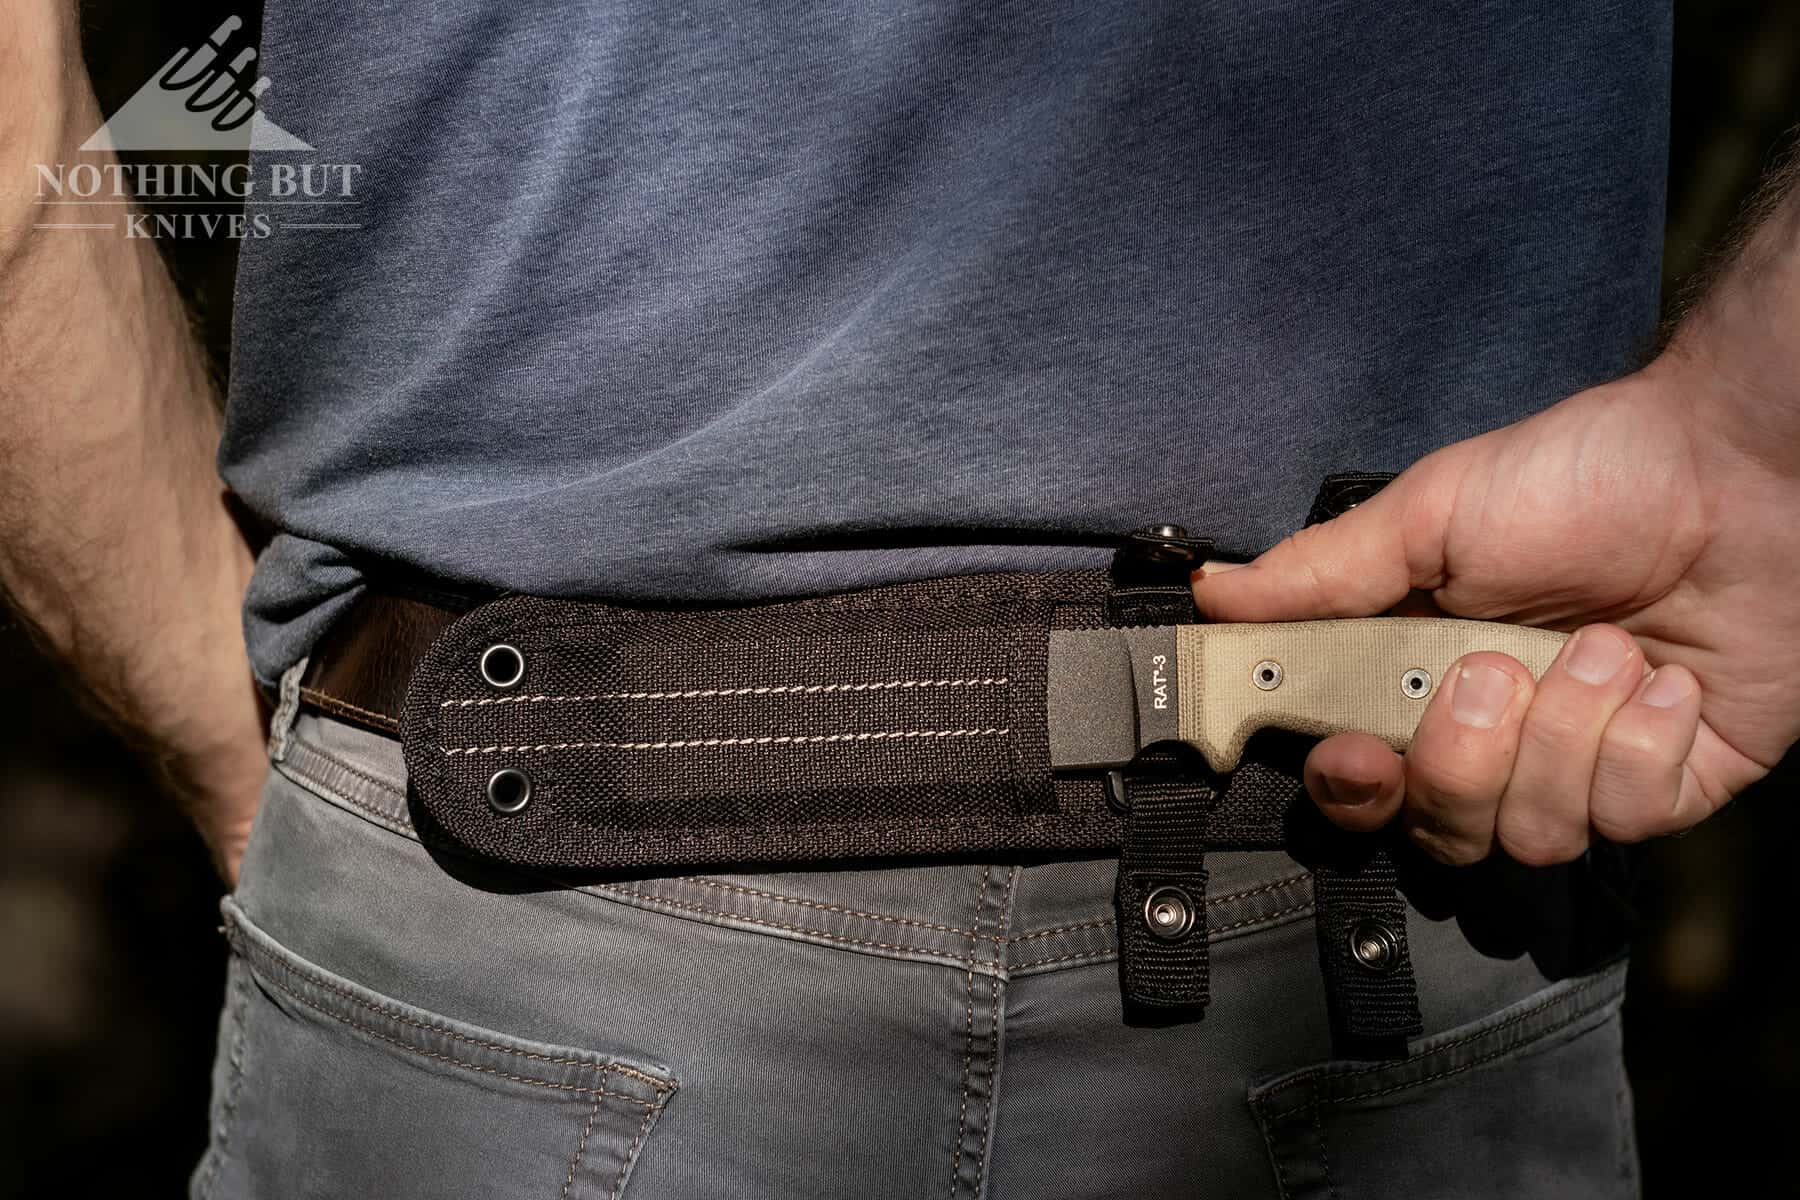 The Rat 3 sheath set up for horizontal carry. 